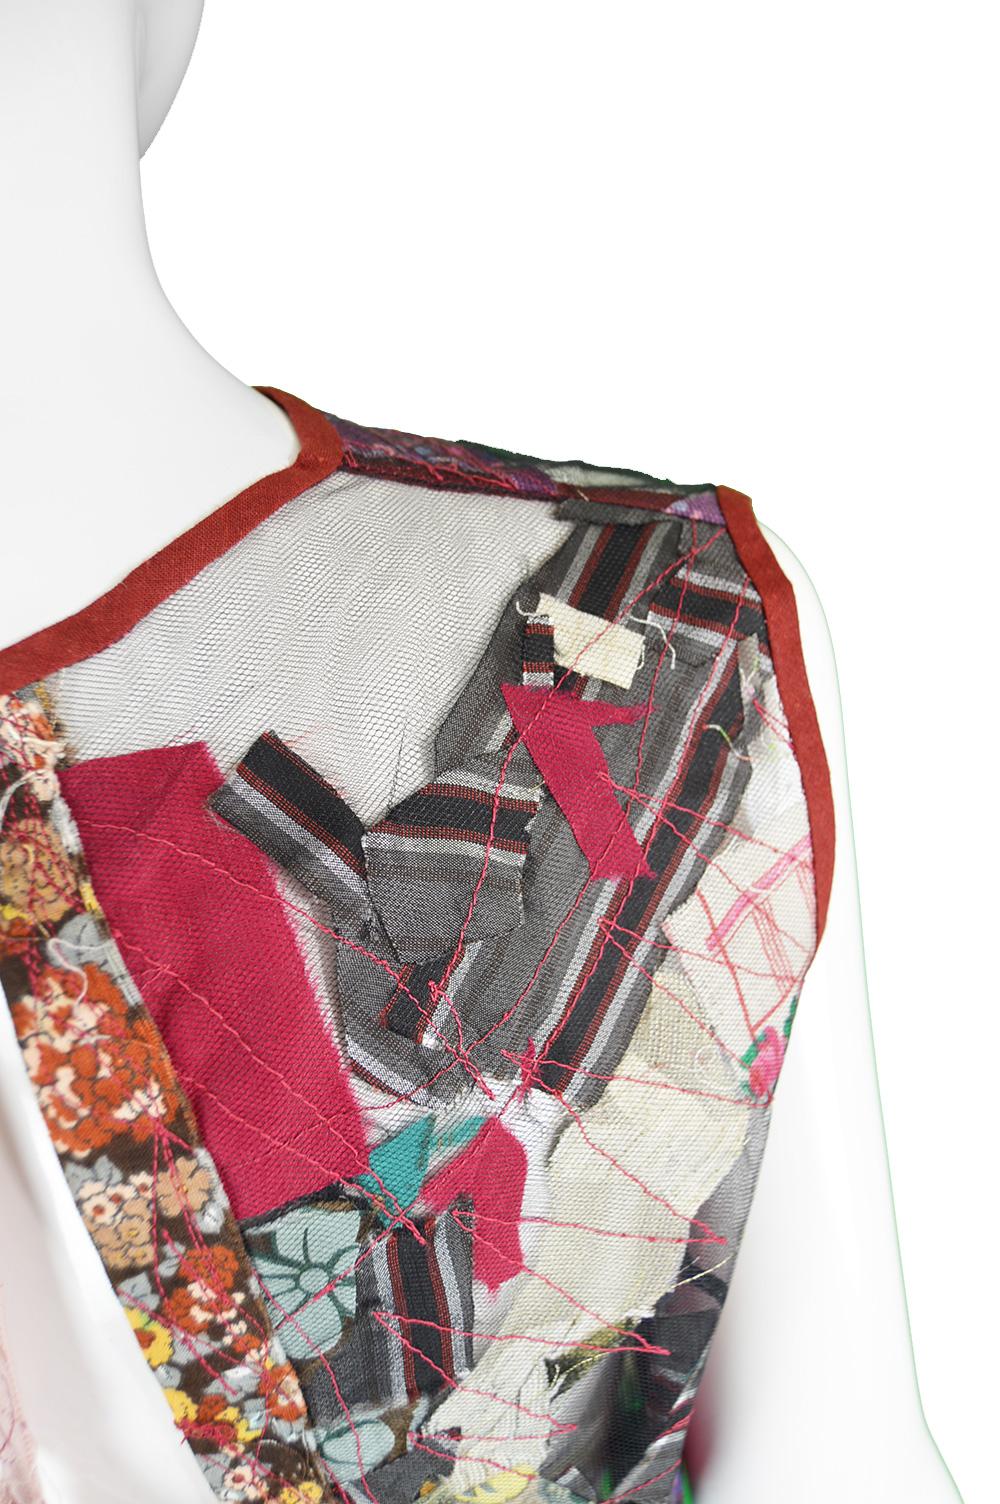 Antonio Marras Runway Artisanal Patchwork Sheer Tulle Top / Jacket, Spring 2000  In Excellent Condition In Doncaster, South Yorkshire